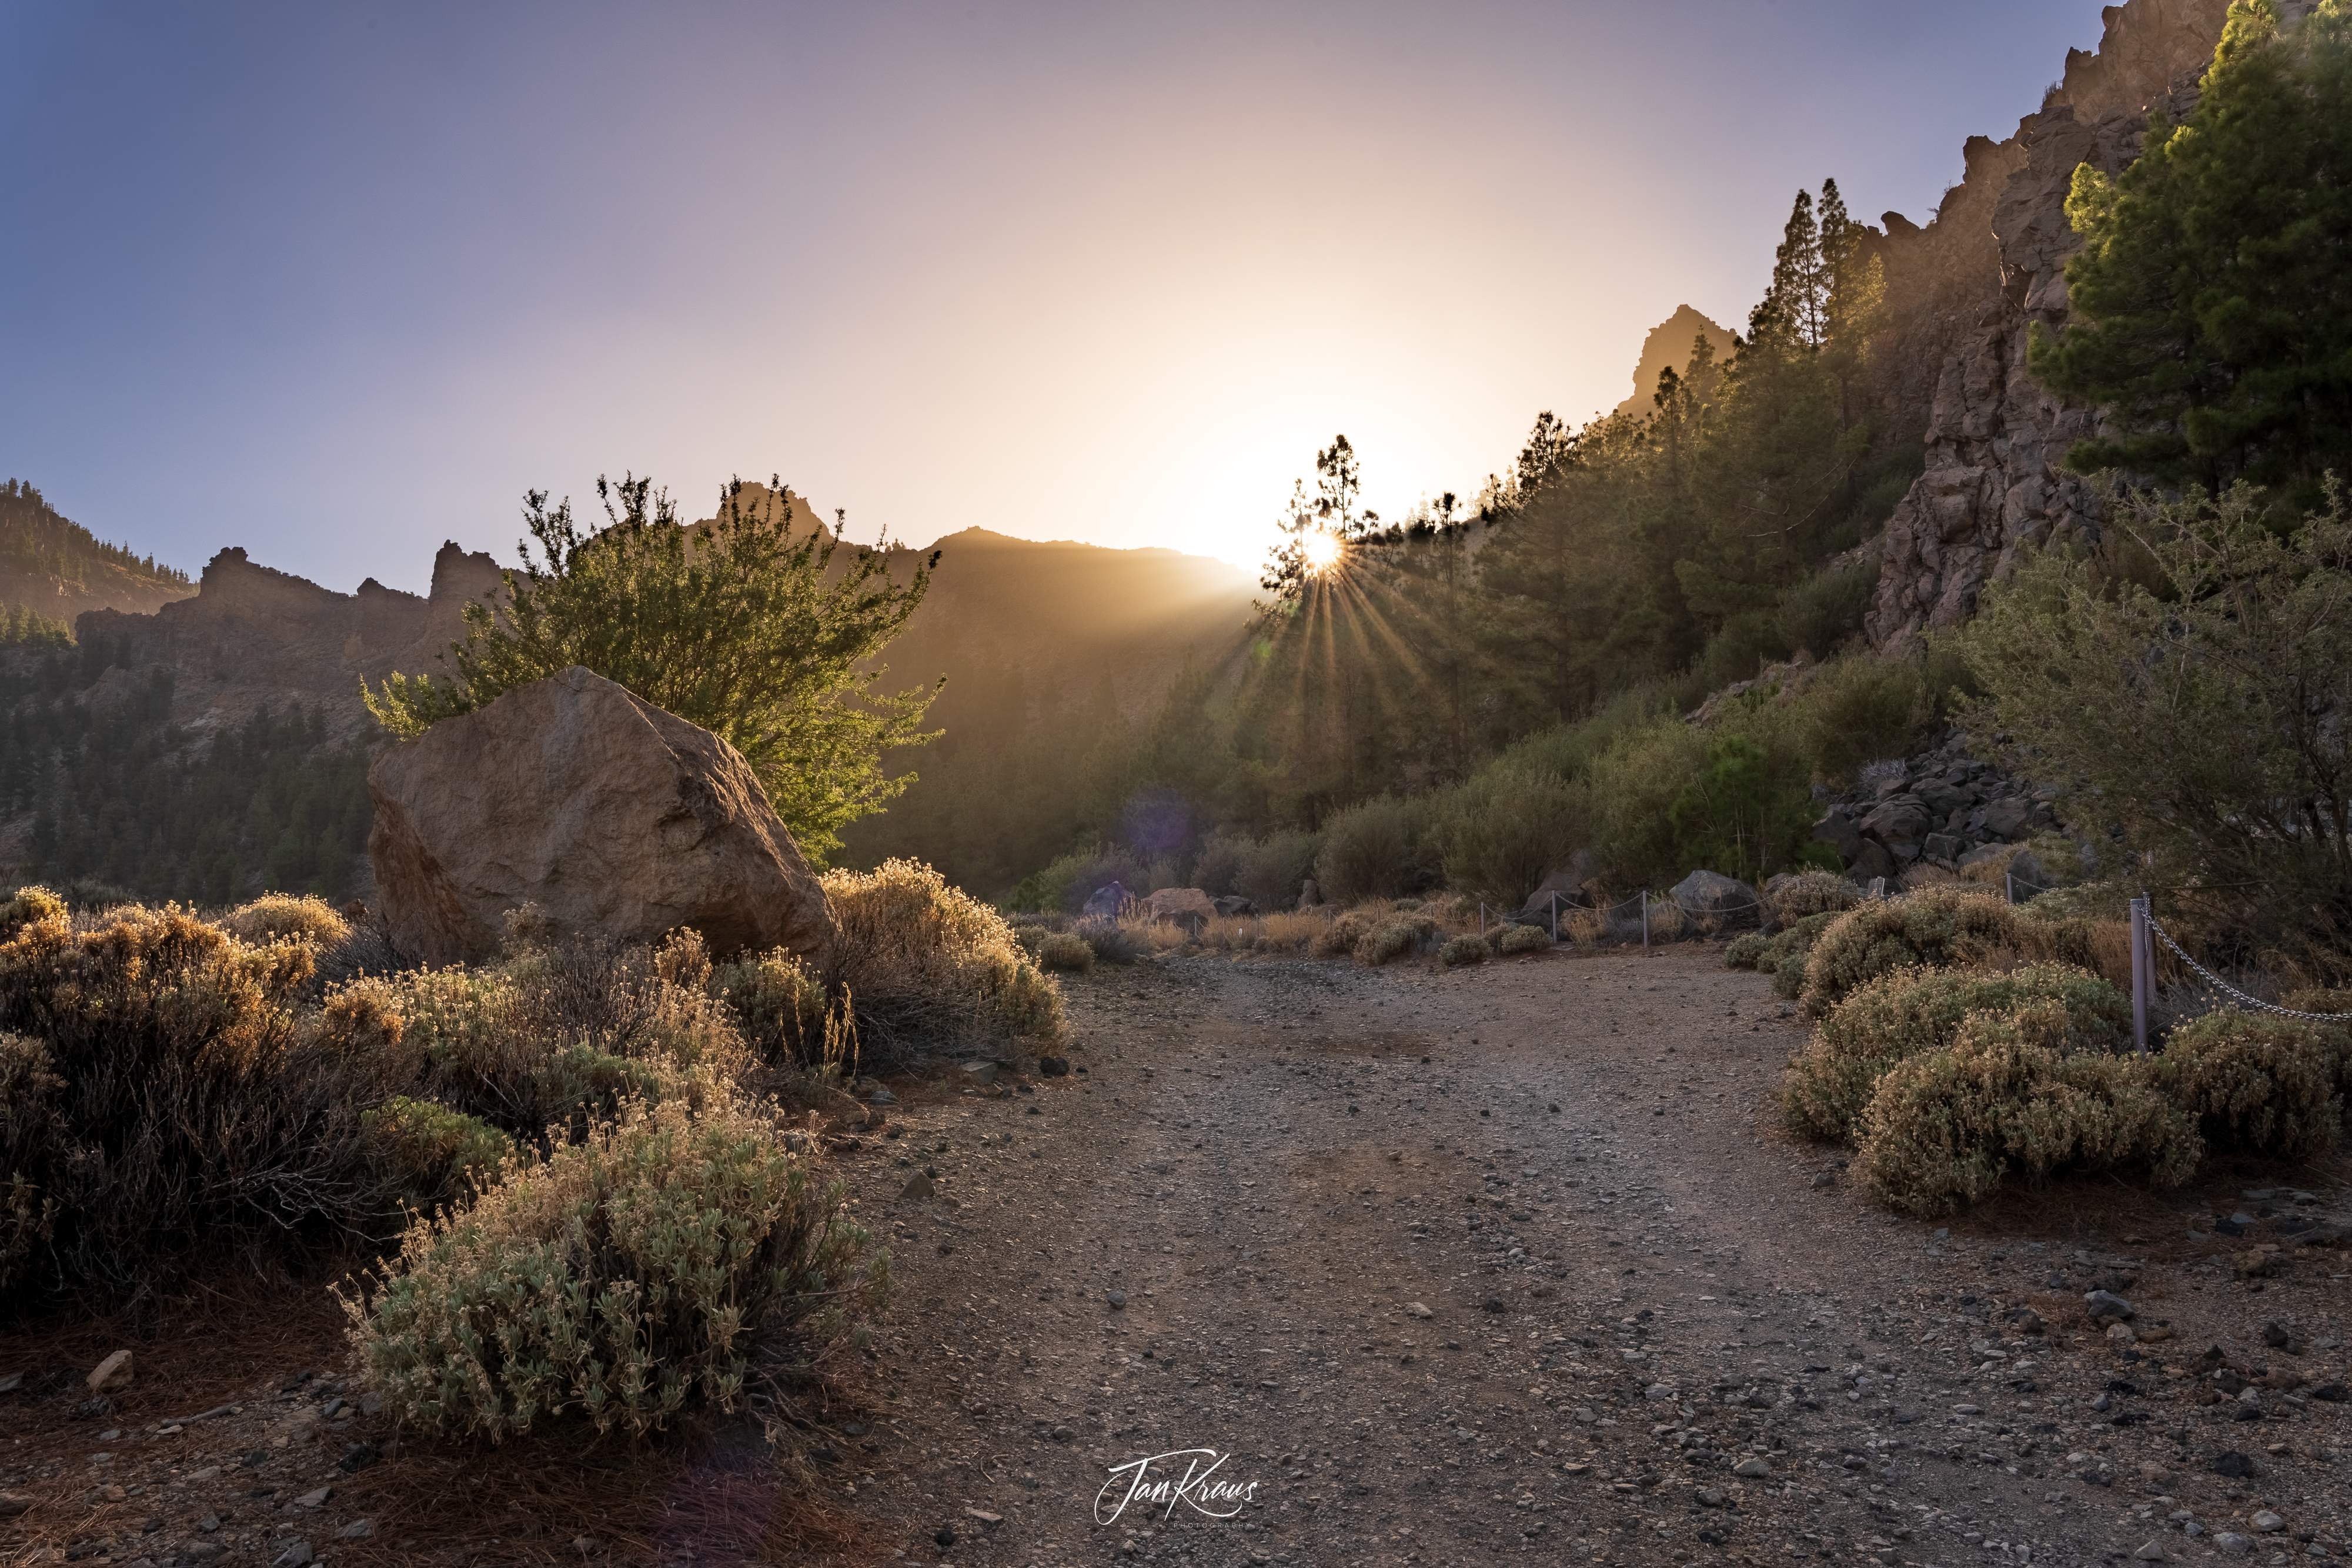 Sunset captured at the hiking trail at El Teide Caldera, Tenerife, Canary Islands, Spain